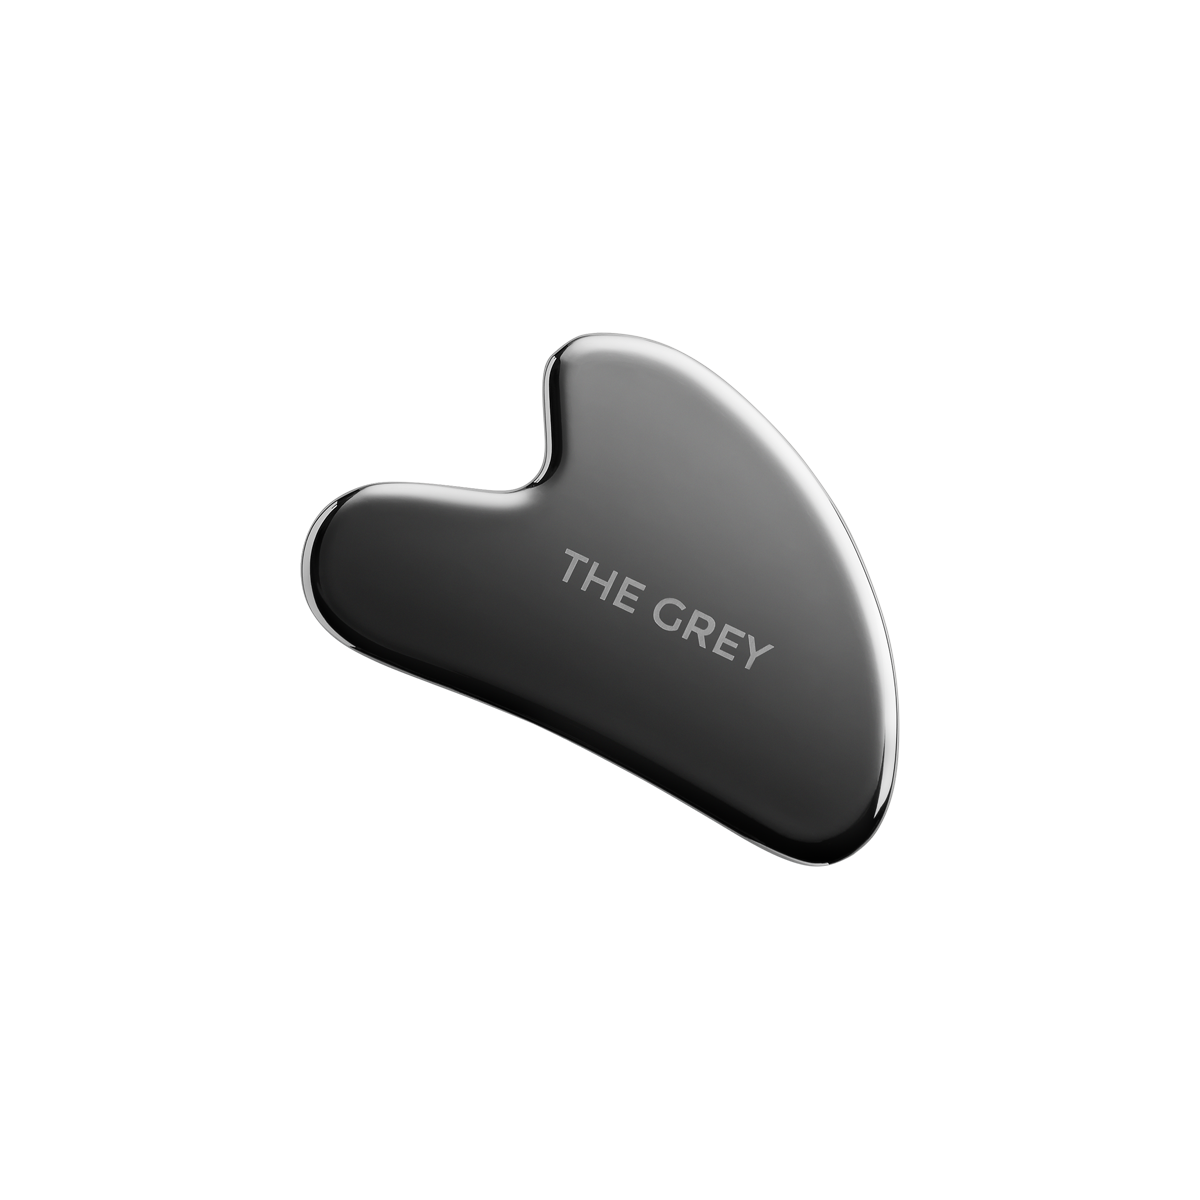 The Grey Skincare - Stainles Steel Gua Sha